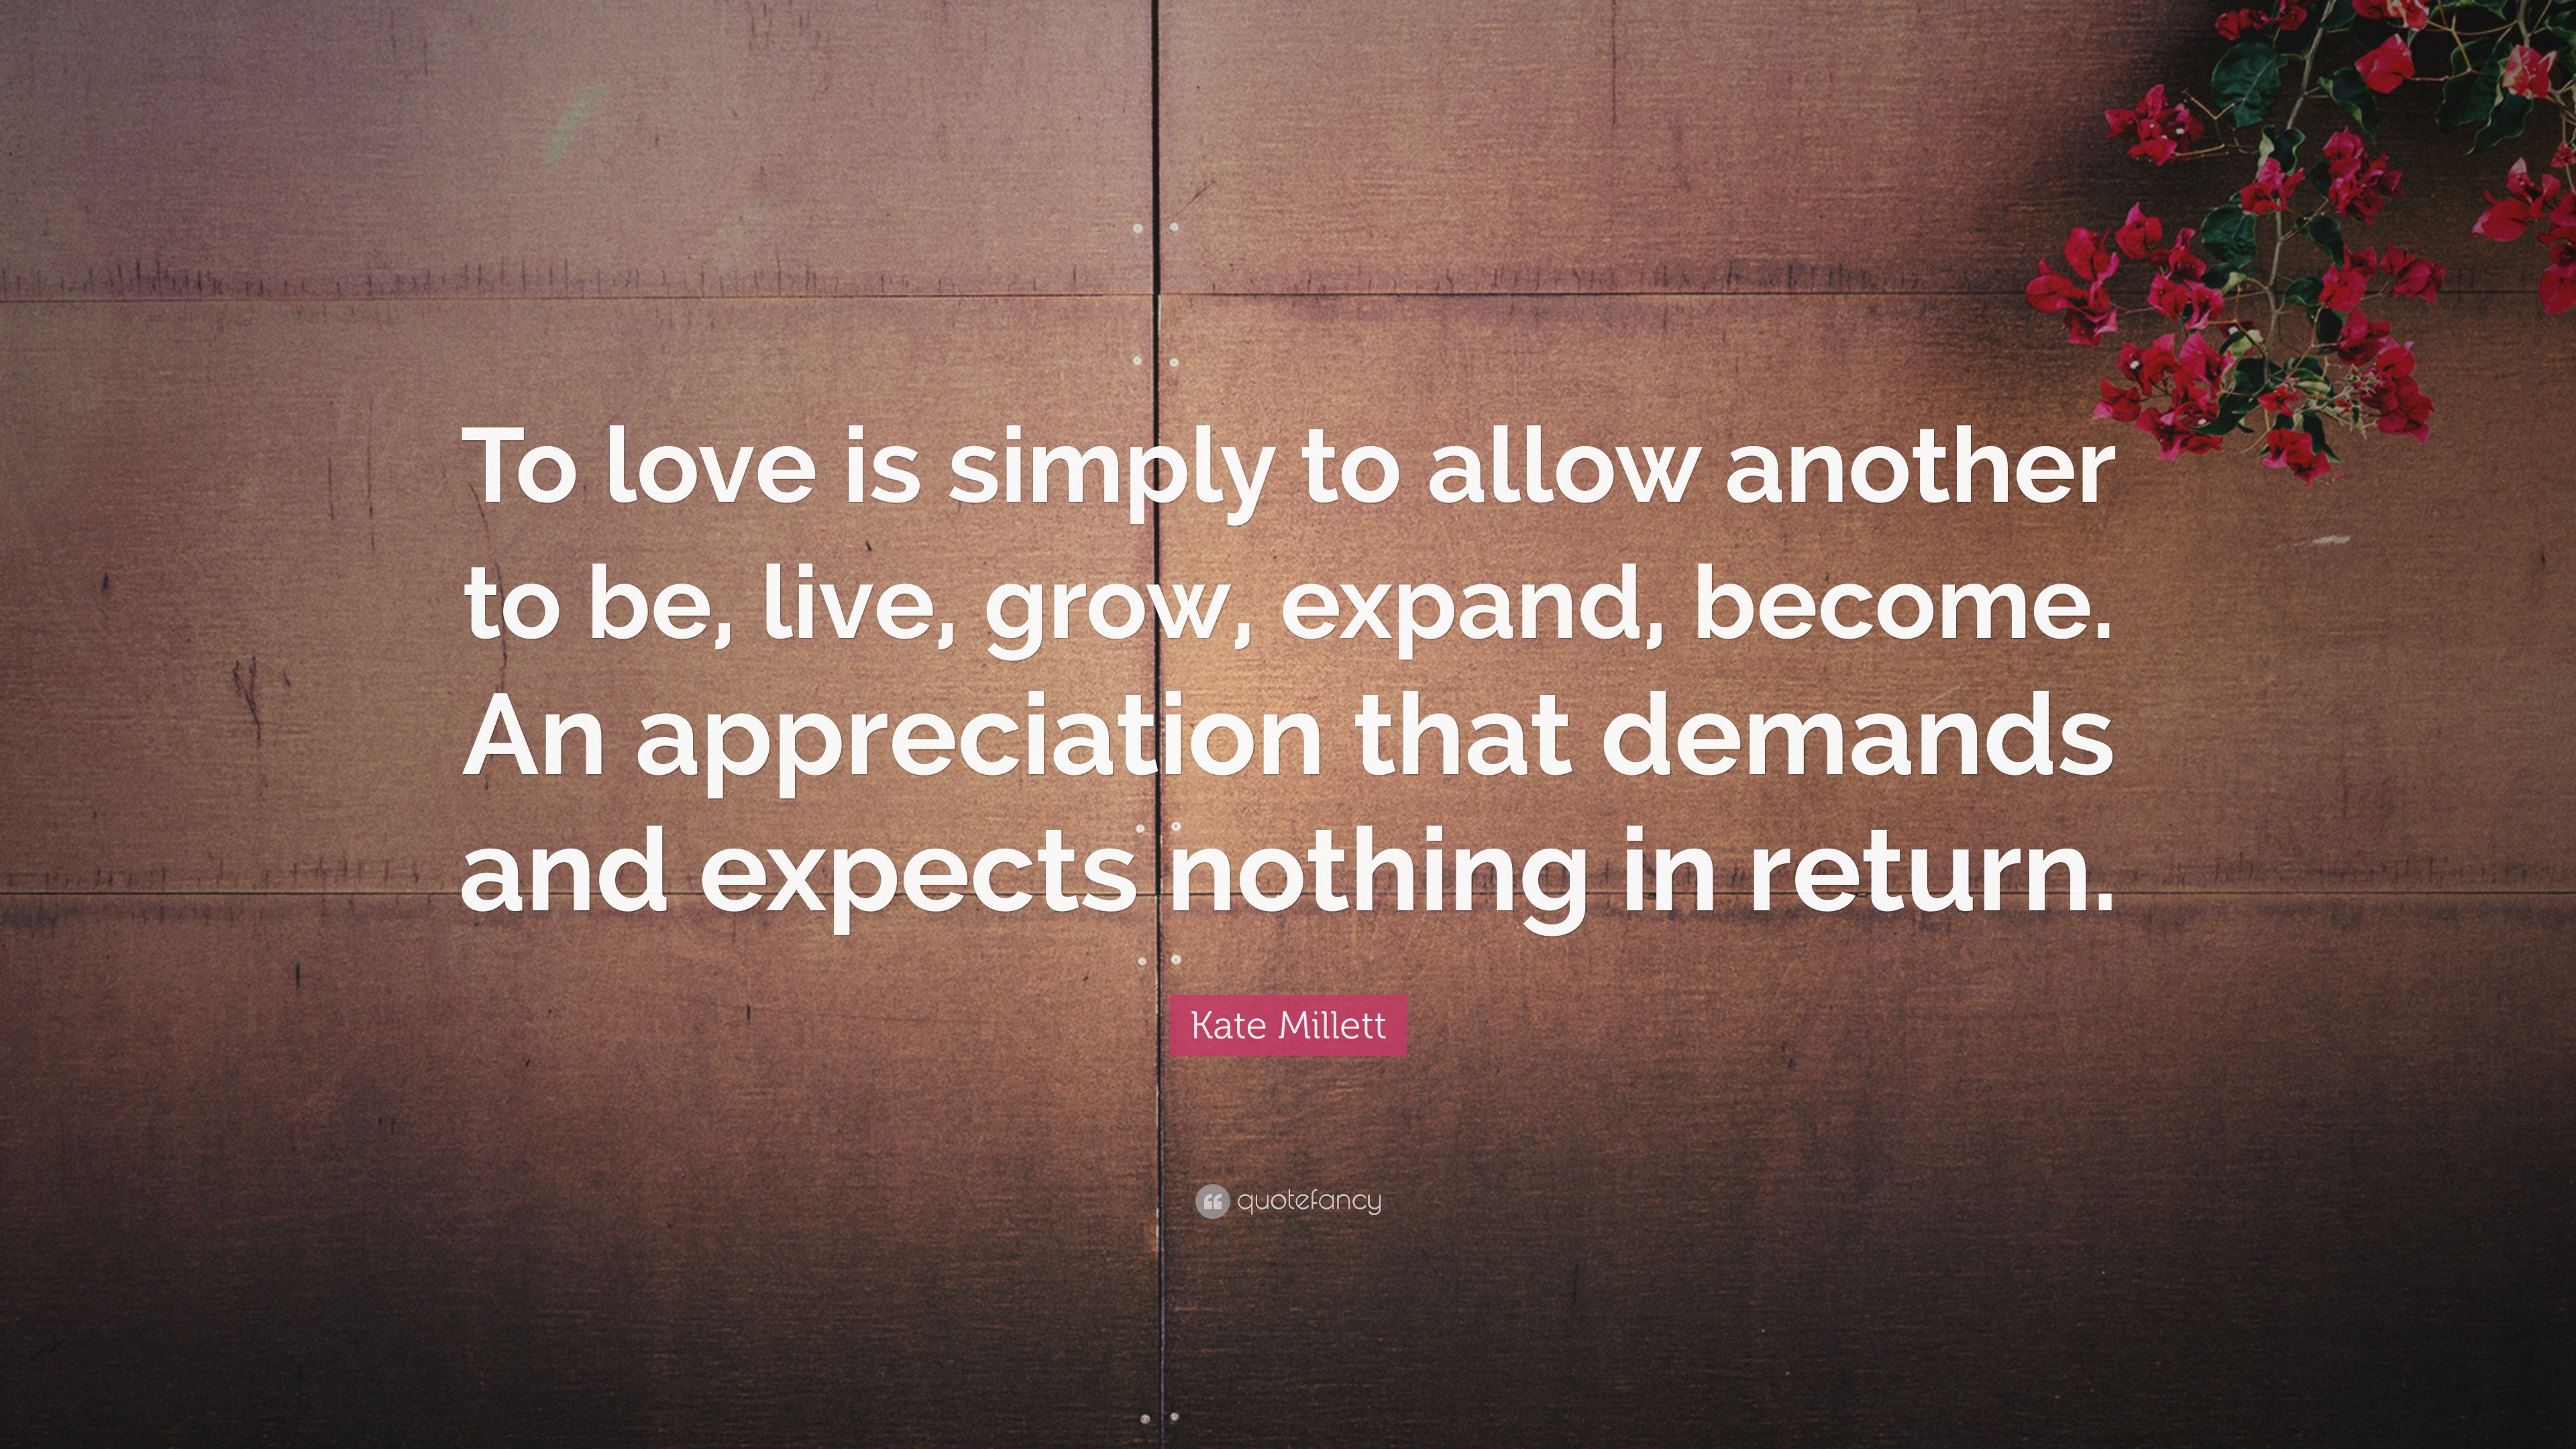 Kate Millett Quote: “To love is simply to allow another to be, live ...